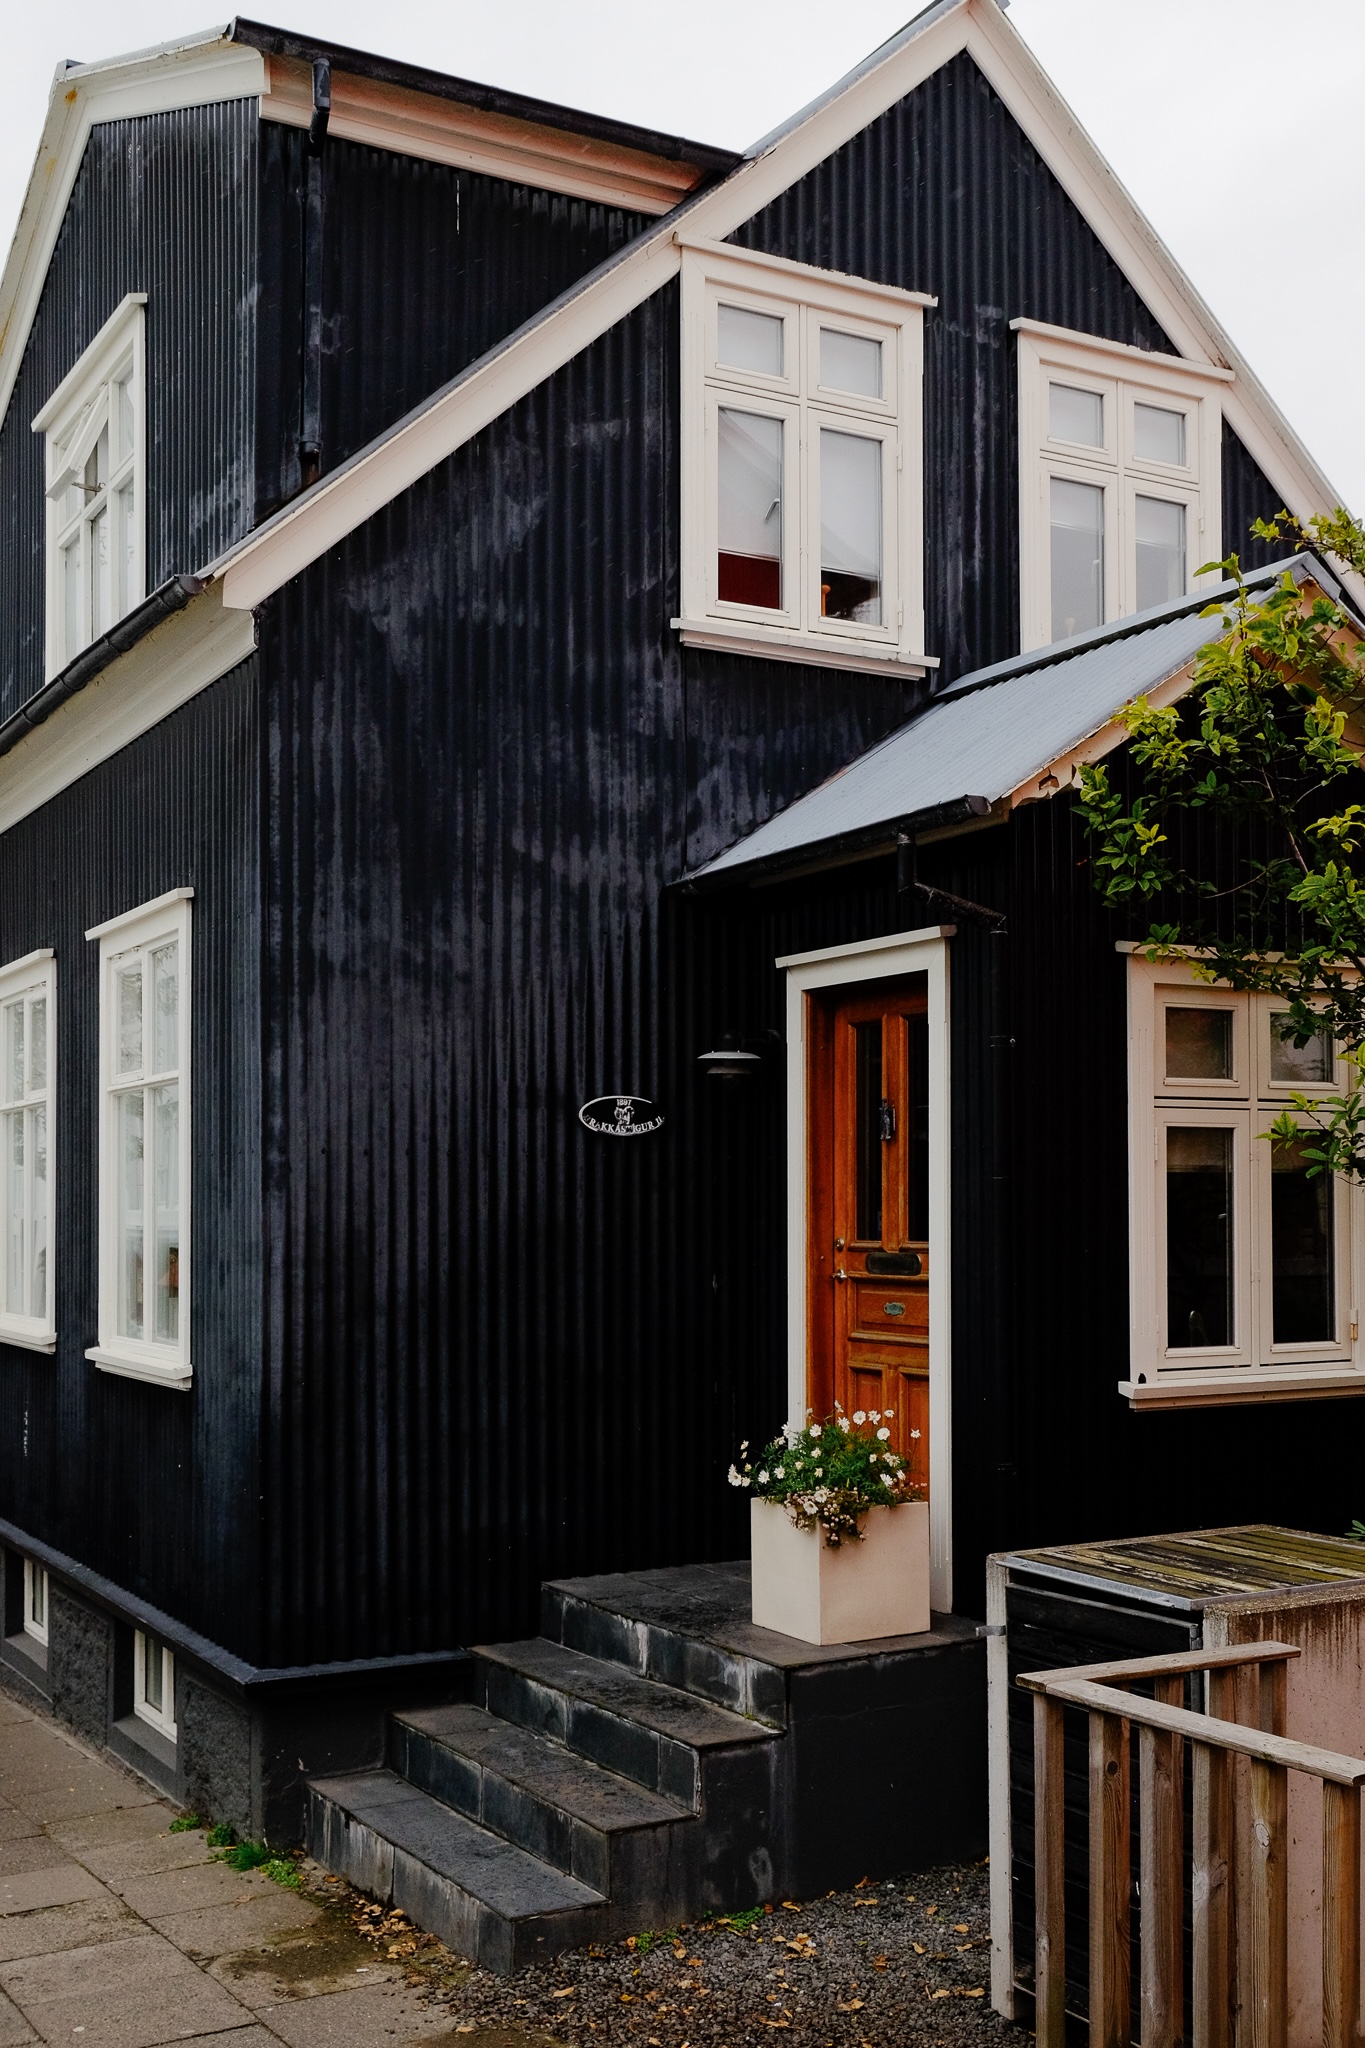 A black corrugated house with white window frames and a wooden door has a cute square pot with flowers in it